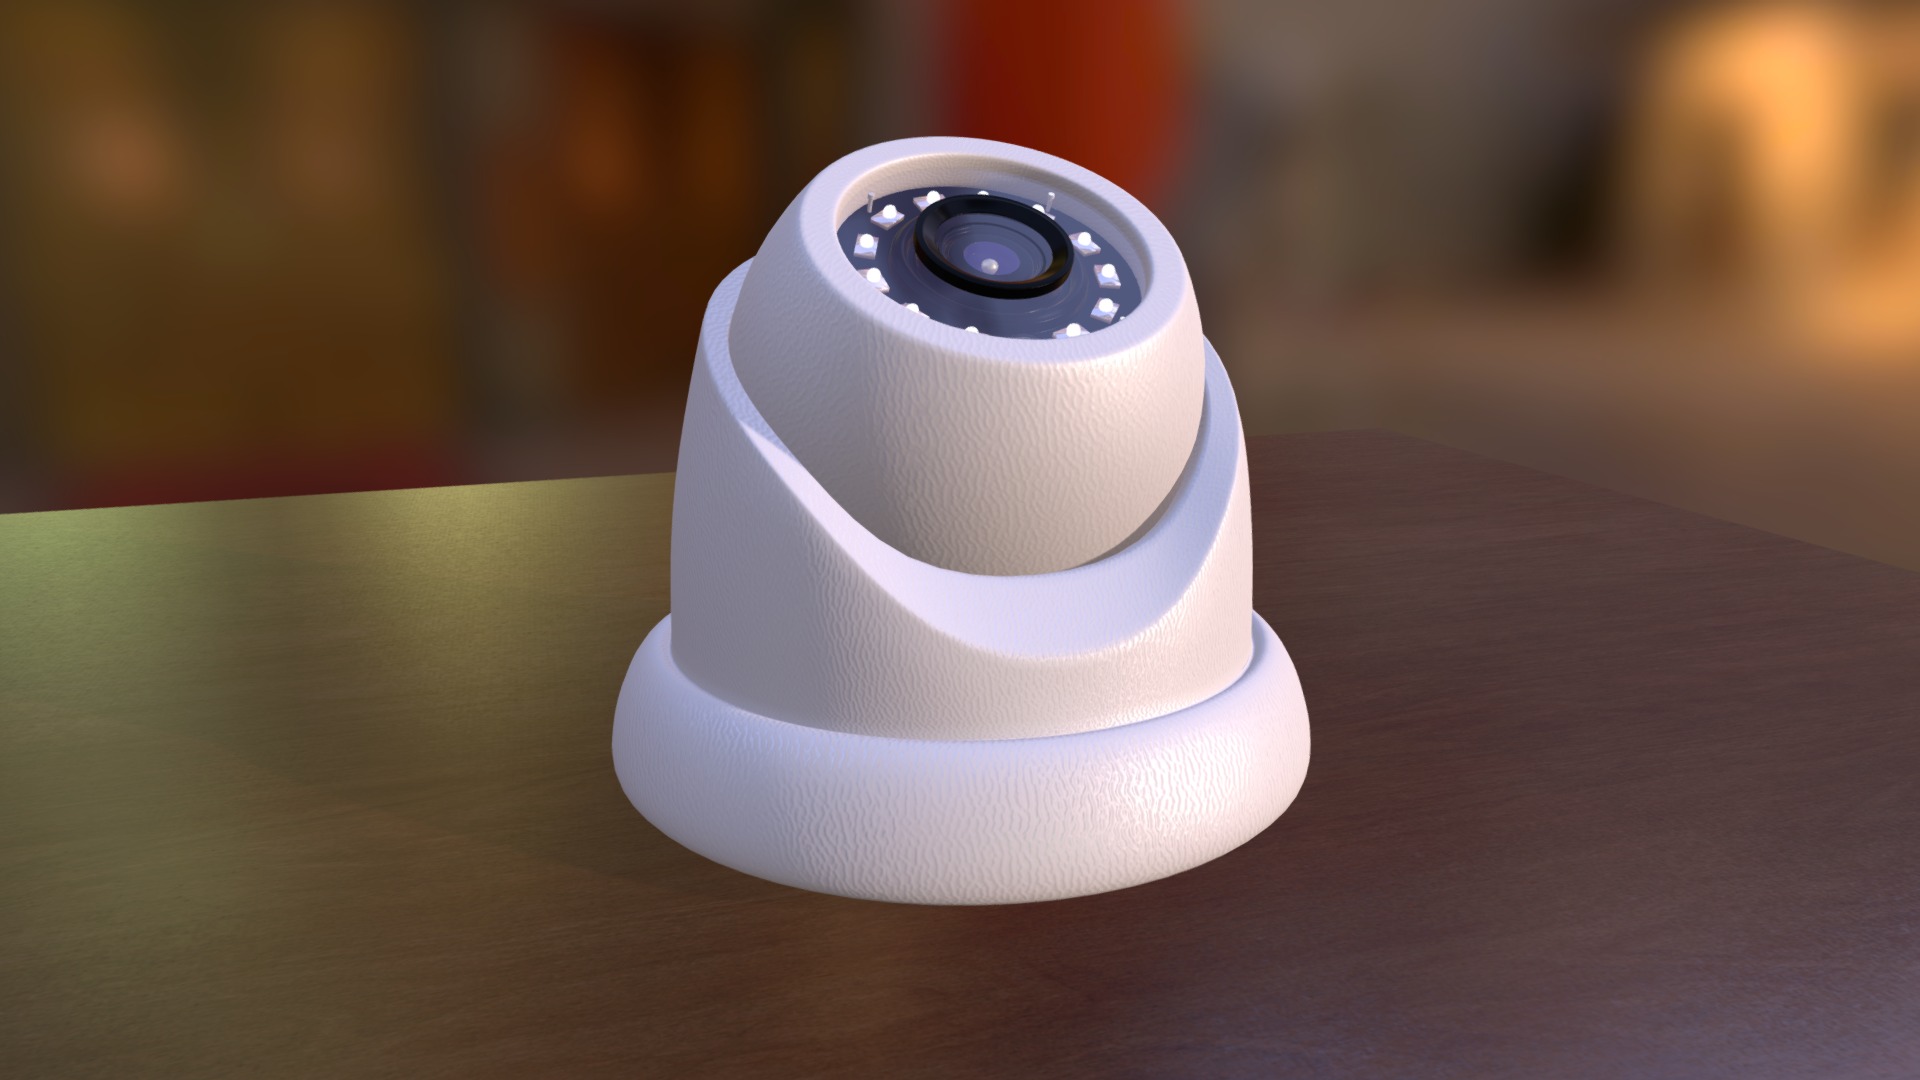 3D model OBJECT: SECURITY DOME CAMERA - This is a 3D model of the OBJECT: SECURITY DOME CAMERA. The 3D model is about a white cylindrical object on a wooden surface.